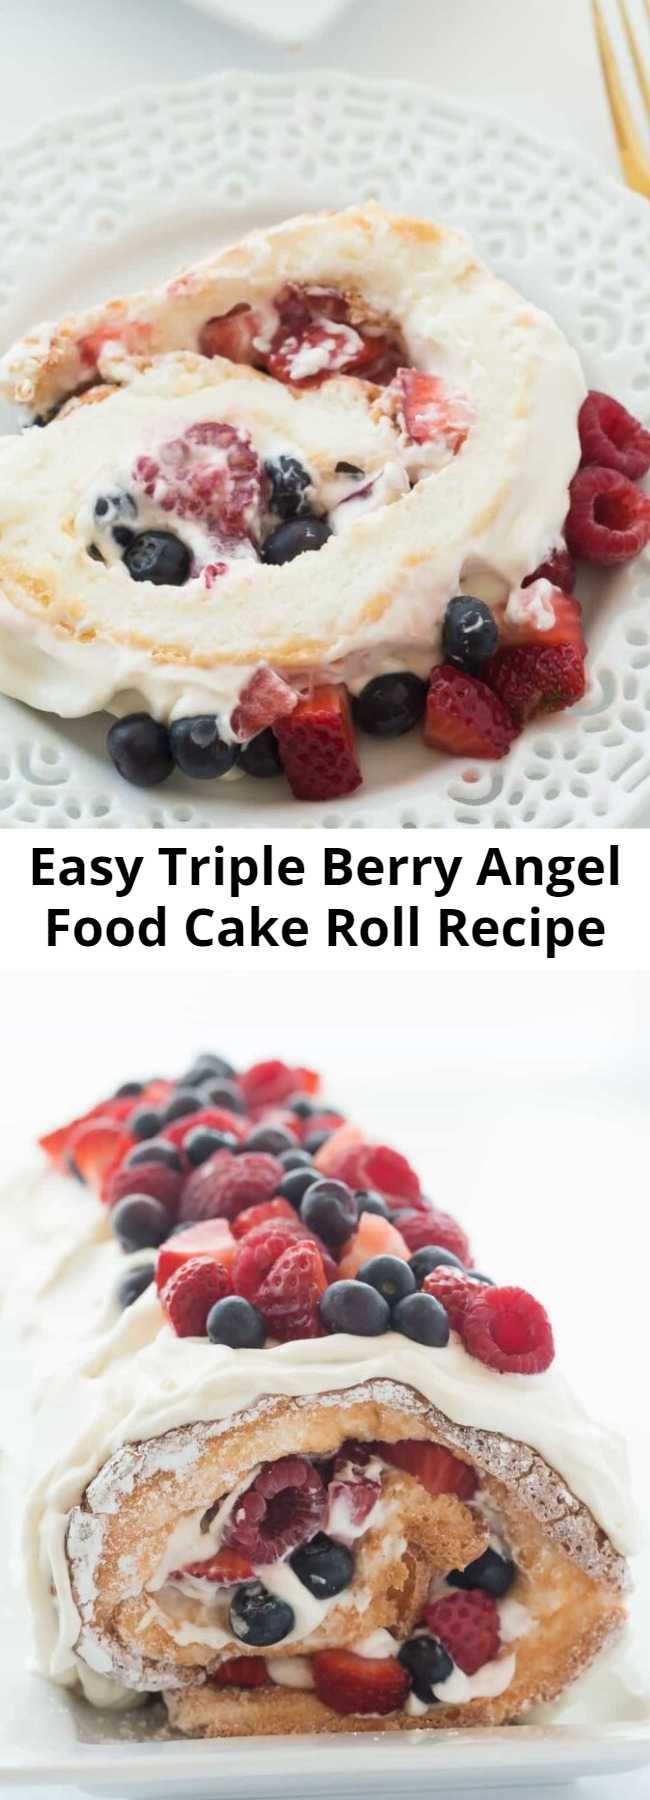 Easy Triple Berry Angel Food Cake Roll Recipe - This Triple Berry Angel Food Cake Roll is an easy red, white and blue dessert (or just red and white!) for the 4th of July or Canada Day, or any day! Perfect with fresh summer strawberries, raspberries and blueberries? #recipe #cake #dessert #strawberry #blueberry #raspberry